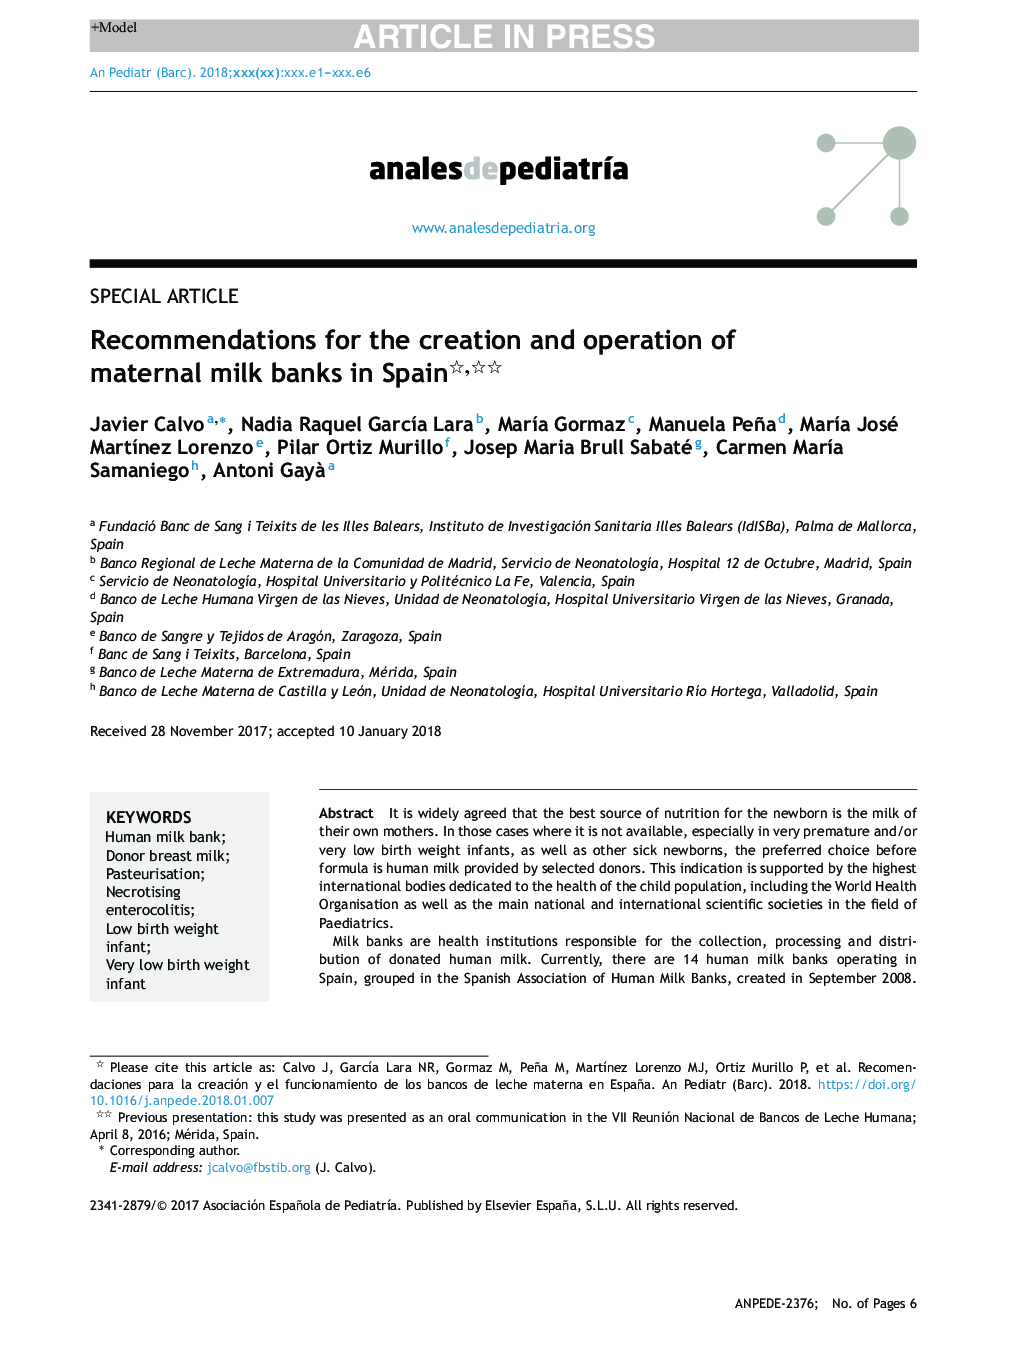 Recommendations for the creation and operation of maternal milk banks in Spain